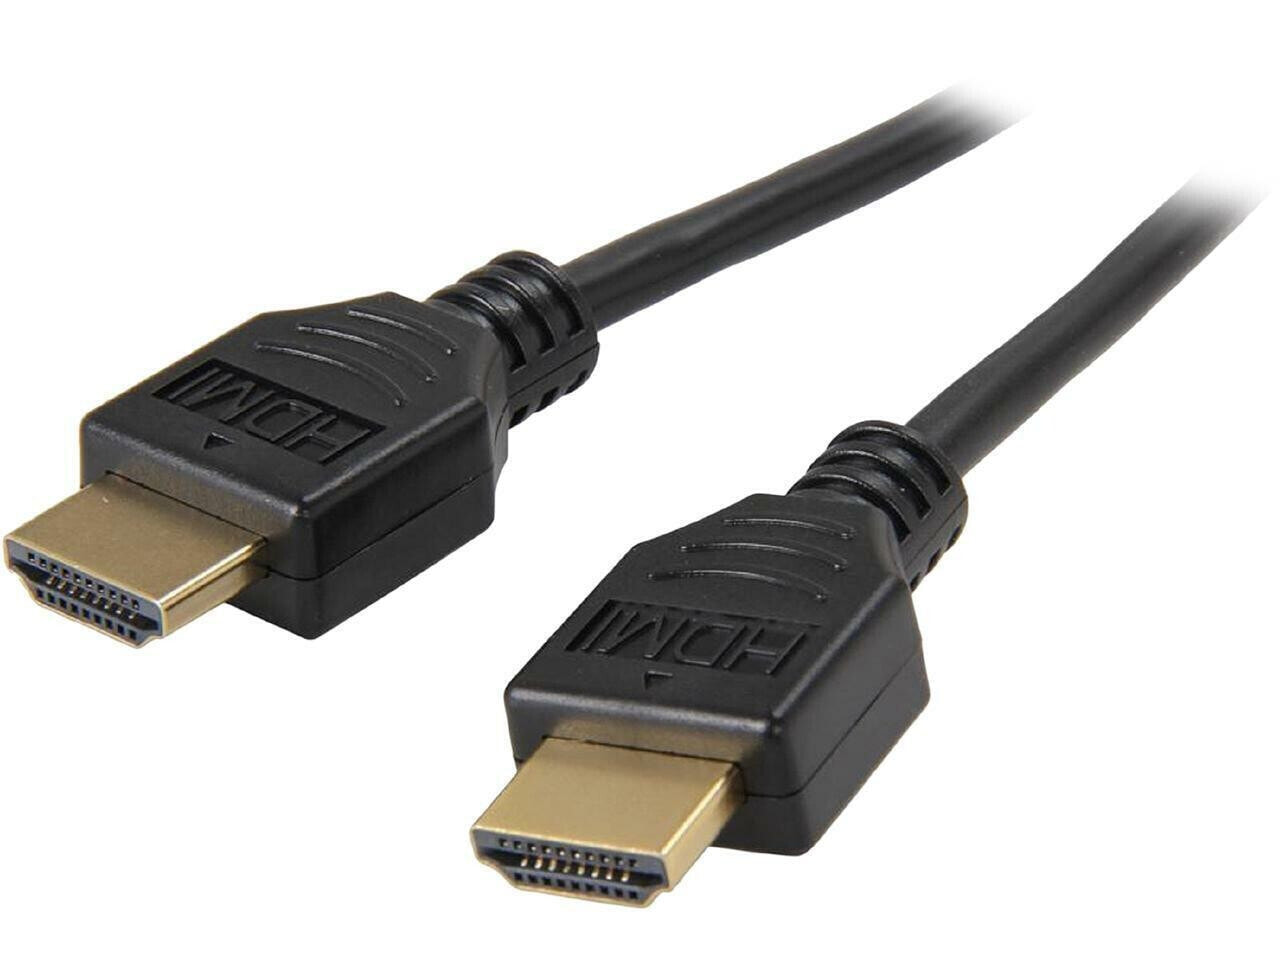 Nippon Labs HDMI-HS-15-2P 15 ft. HDMI 2.0 Cable, High-Speed HDTV Cable, Supports